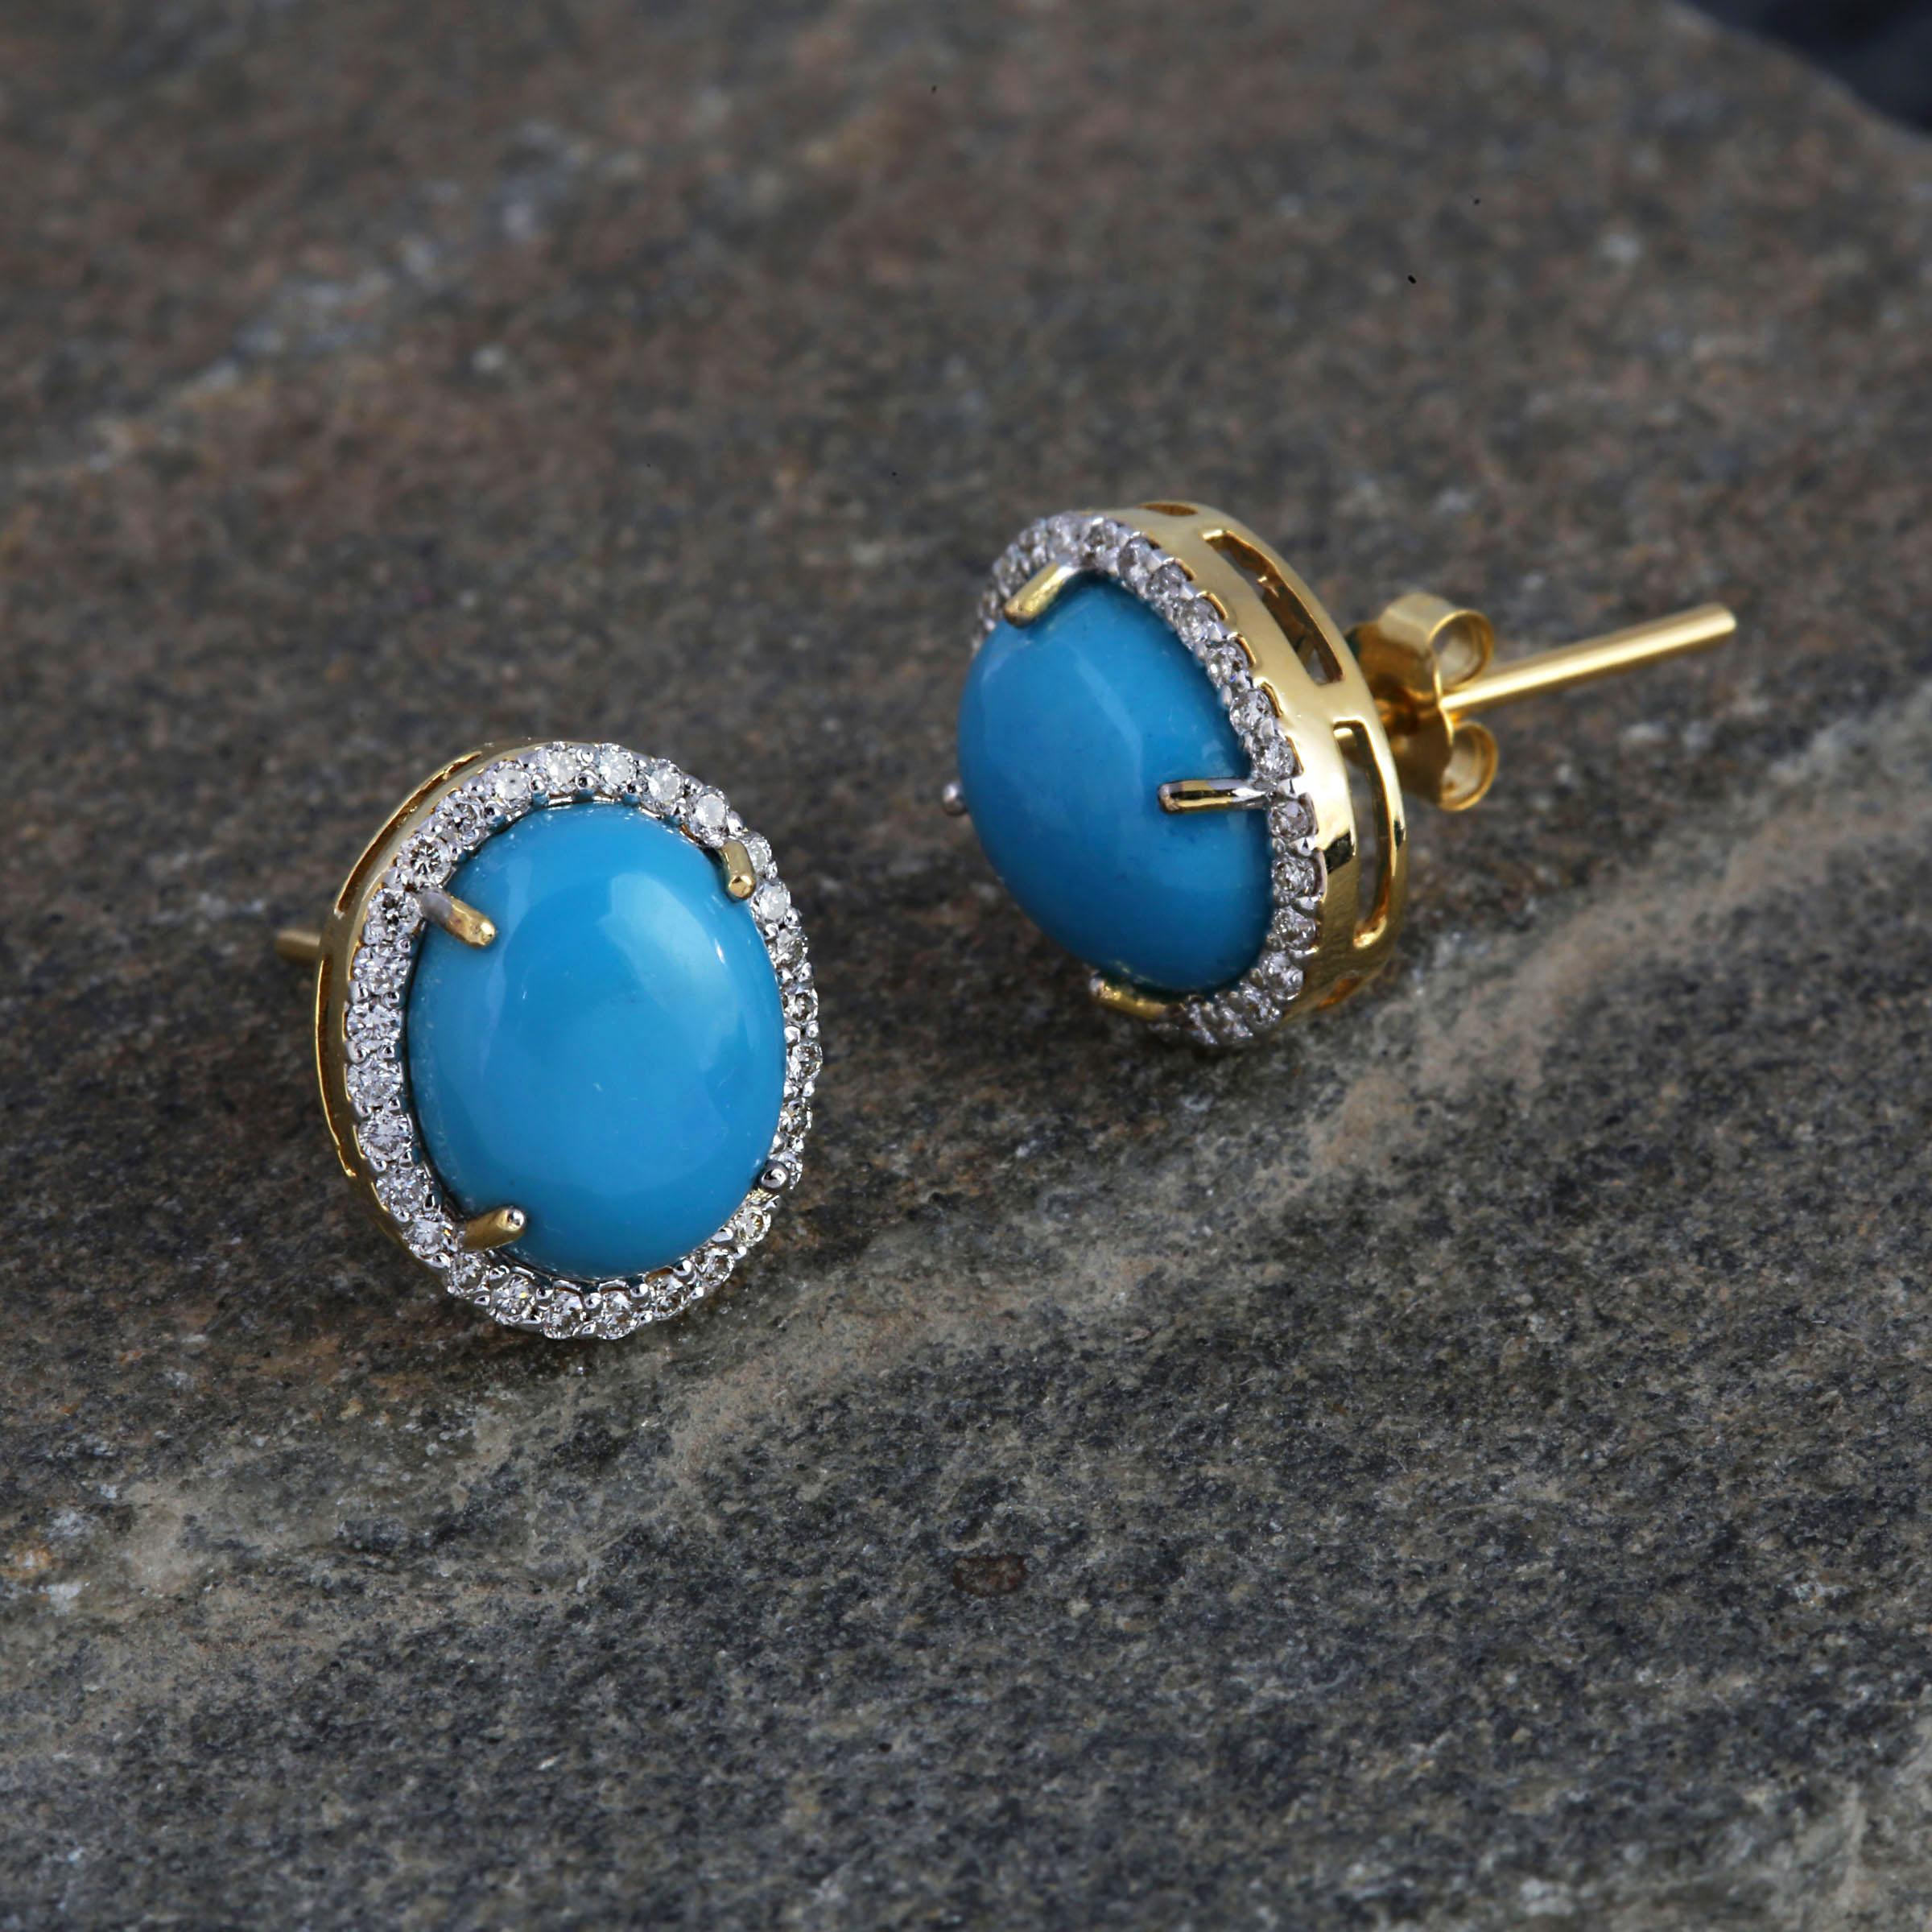 Turquoise Stud Earrings with Diamond in 14k Gold For Sale 1